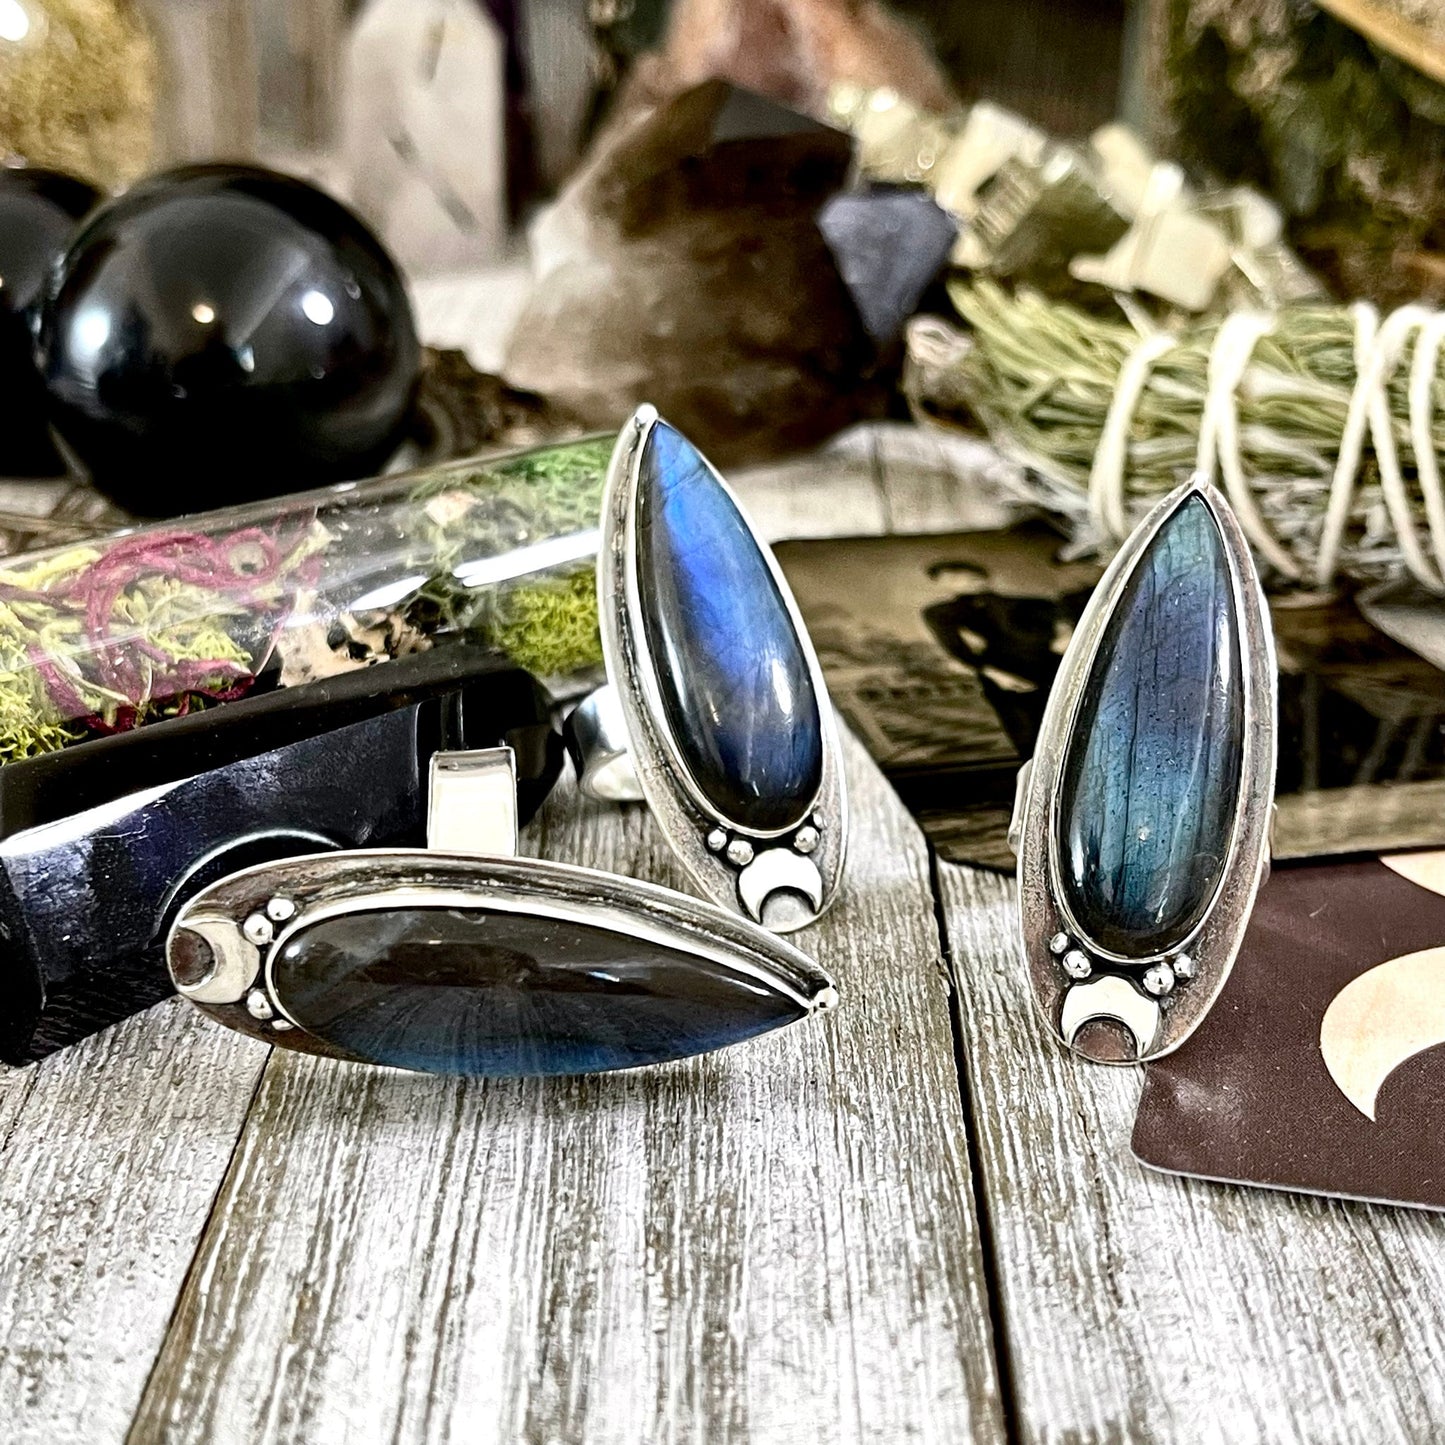 Big Crystal Ring, Blue Crystal Ring, Blue stone Ring, Bohemian Jewelry, Bohemian Ring, boho jewelry, Etsy ID: 1088284026, Foxlark Alchemy, FOXLARK- RINGS, Goth Jewelry, Jewelry, Labradorite Jewelry, Moon Jewelry, Rings, Rock and Roll Ring, Statement Rings